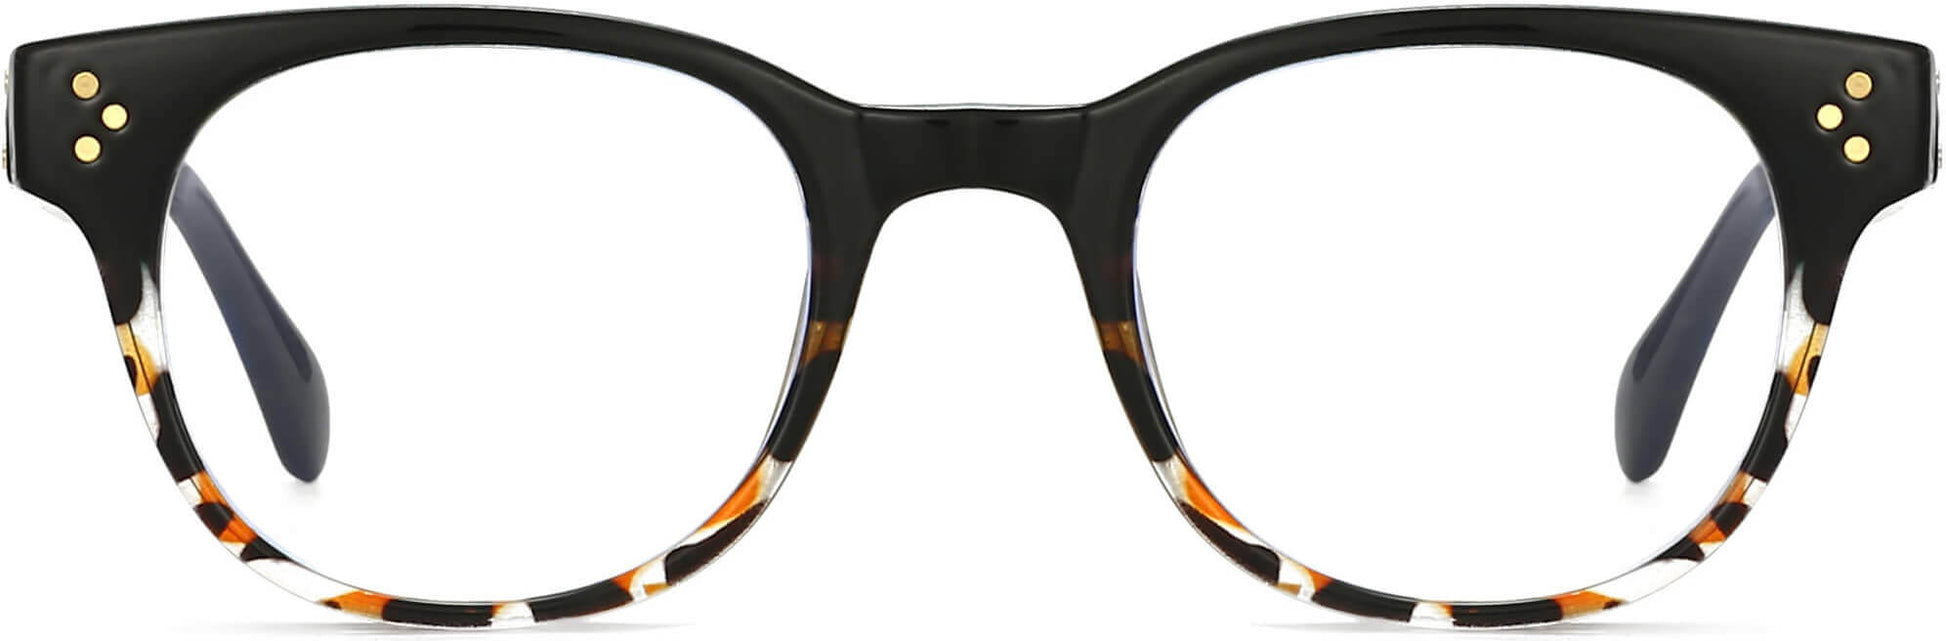 Kelly Round Tortoise Eyeglasses from ANRRI, front view